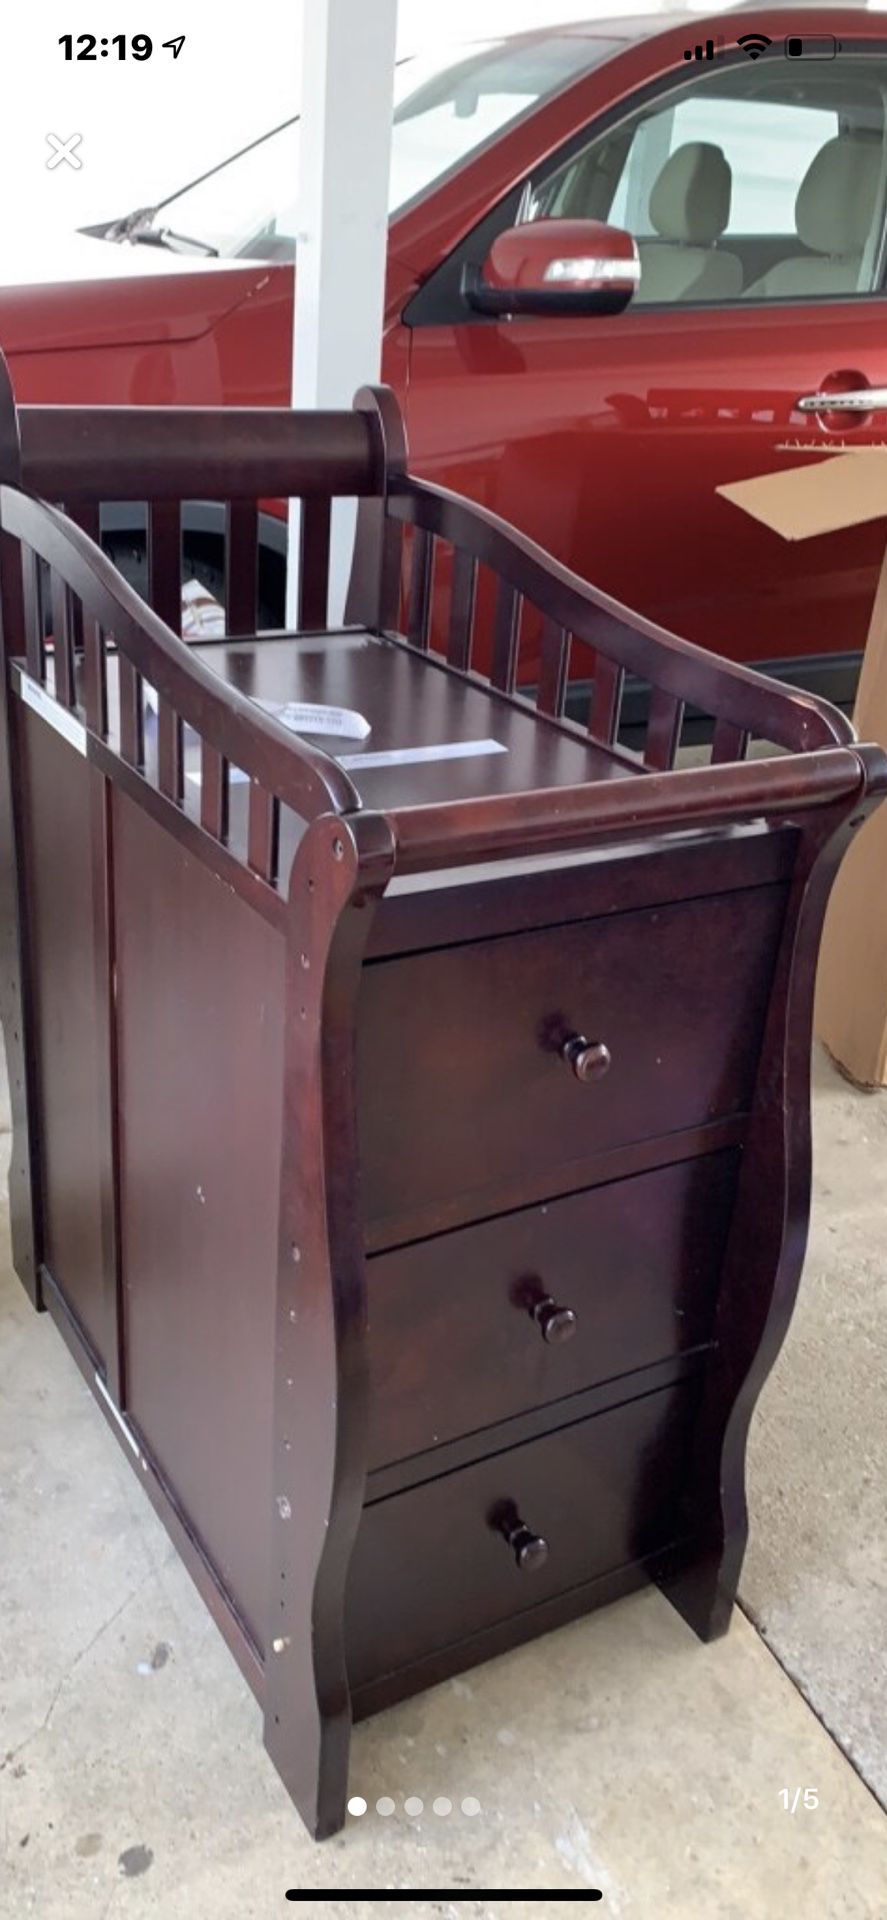 Toddler bed and changing table